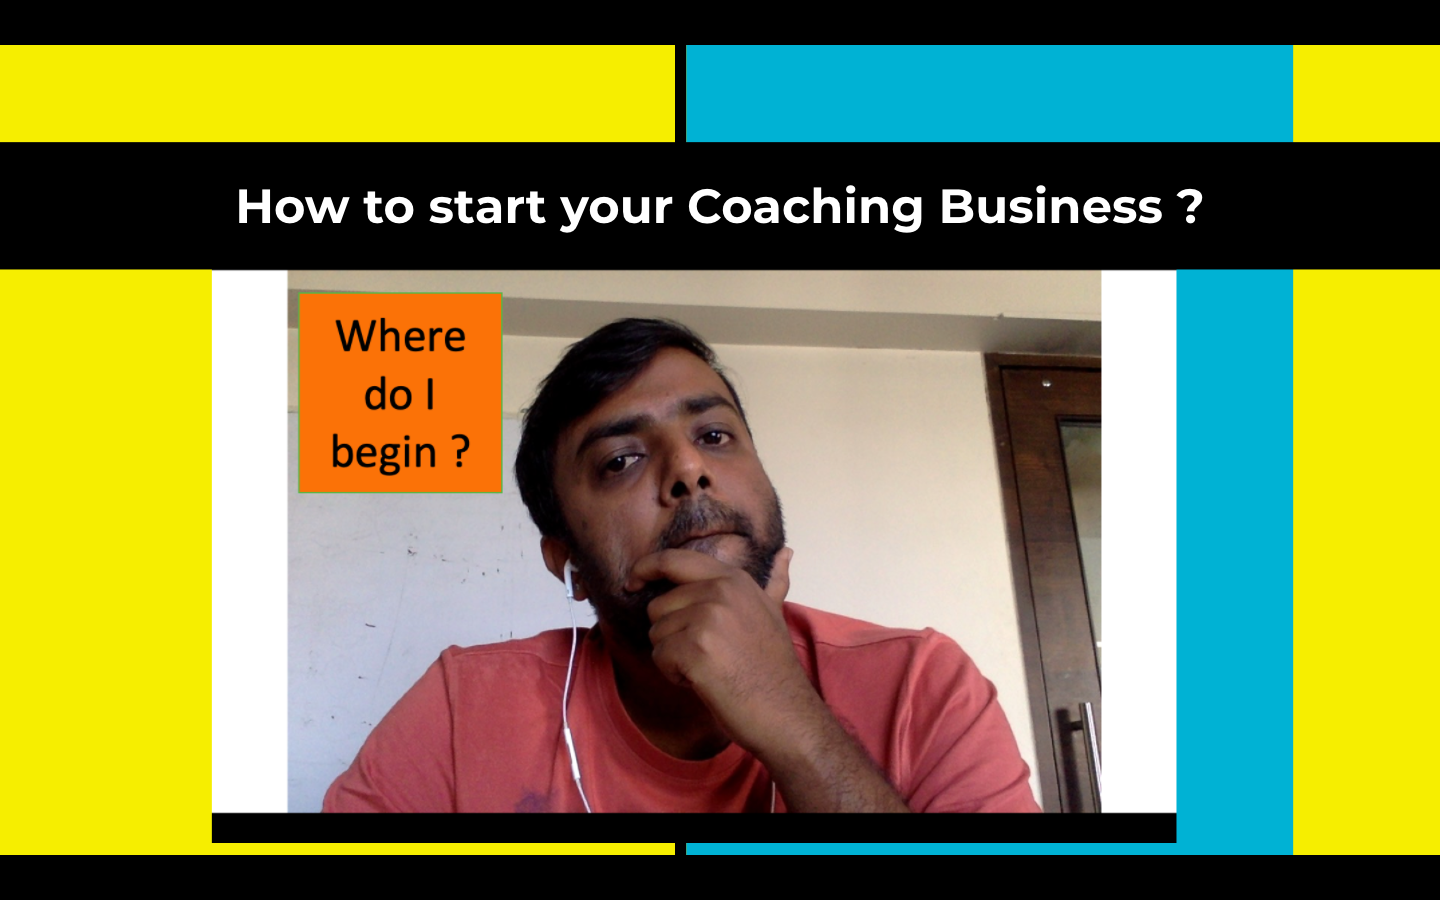 How to start your Coaching Business from scratch